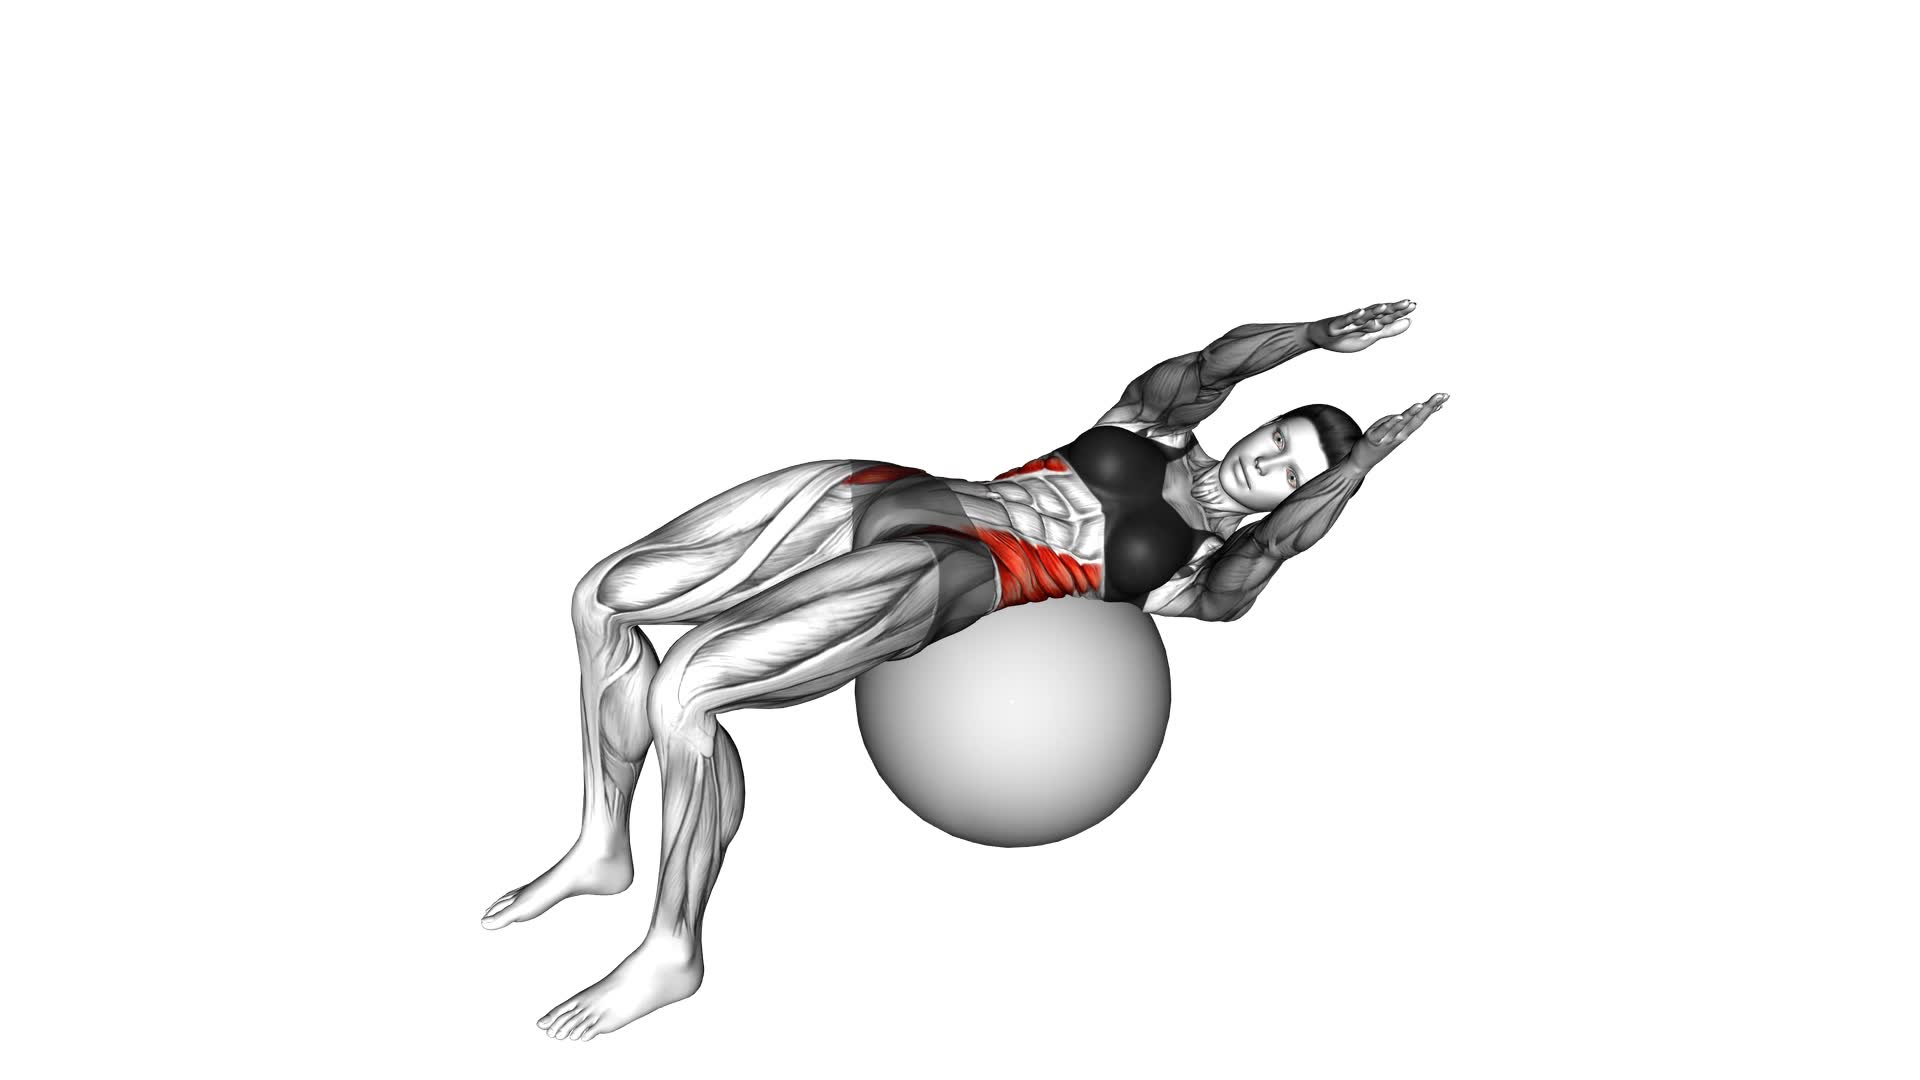 Russian Twist (On Stability Ball Arms Straight) - Video Exercise Guide & Tips